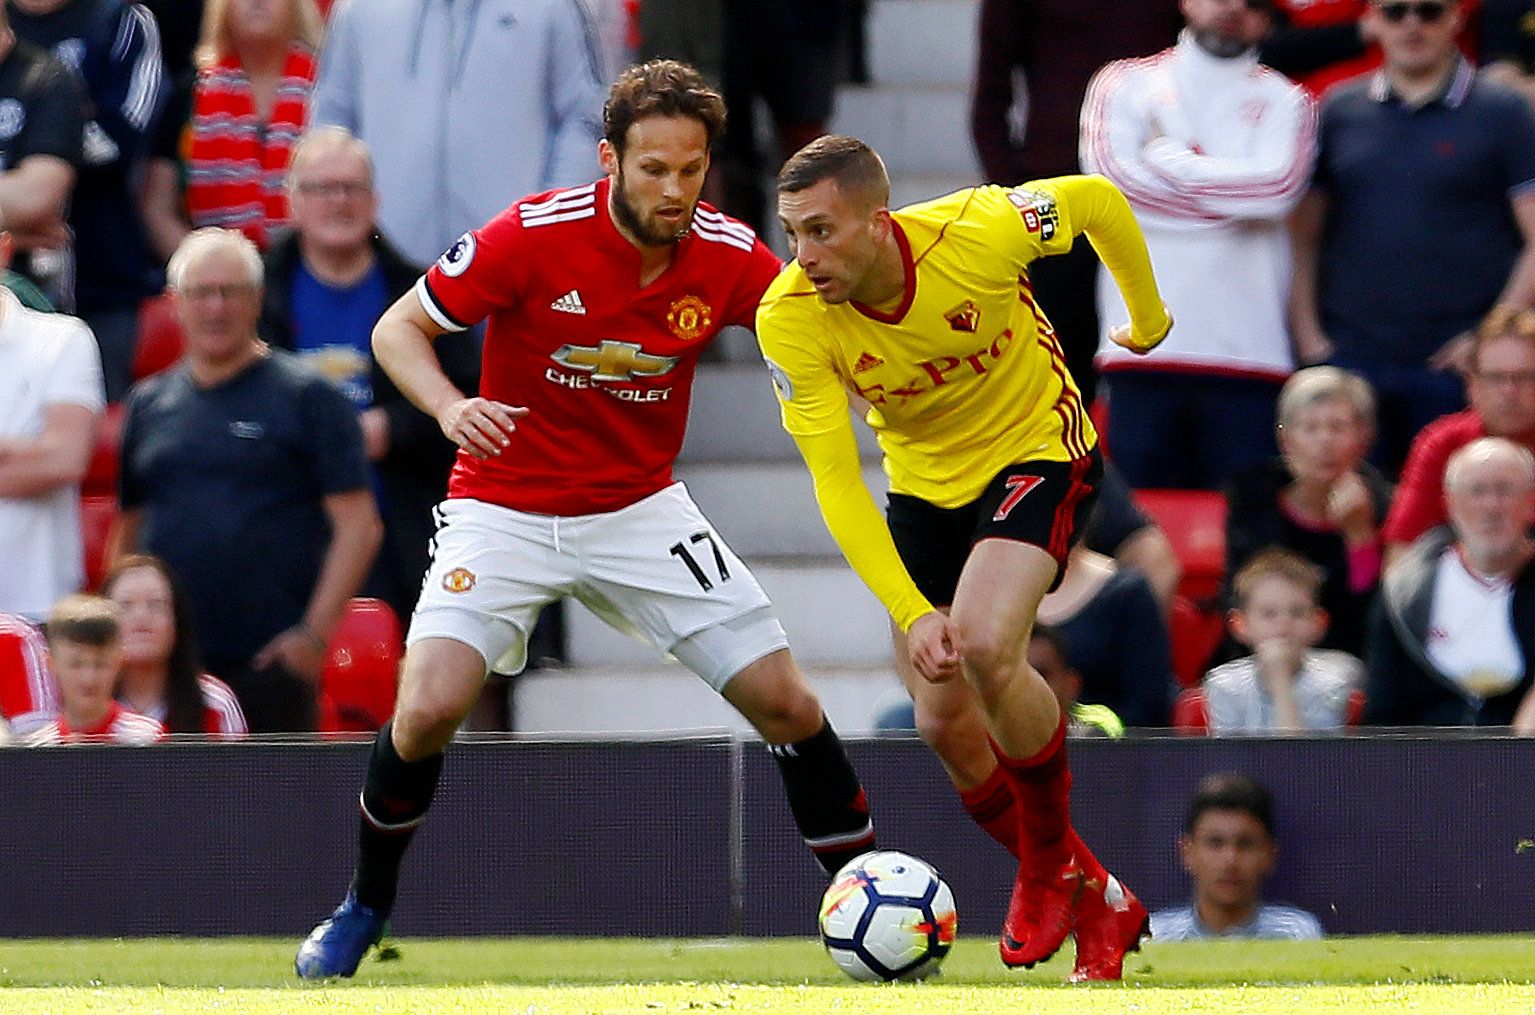 Soccer Football - Premier League - Manchester United vs Watford - Old Trafford, Manchester, Britain - May 13, 2018   Manchester United's Daley Blind in action with Watford's Gerard Deulofeu    Action Images via Reuters/Jason Cairnduff    EDITORIAL USE ONLY. No use with unauthorized audio, video, data, fixture lists, club/league logos or 